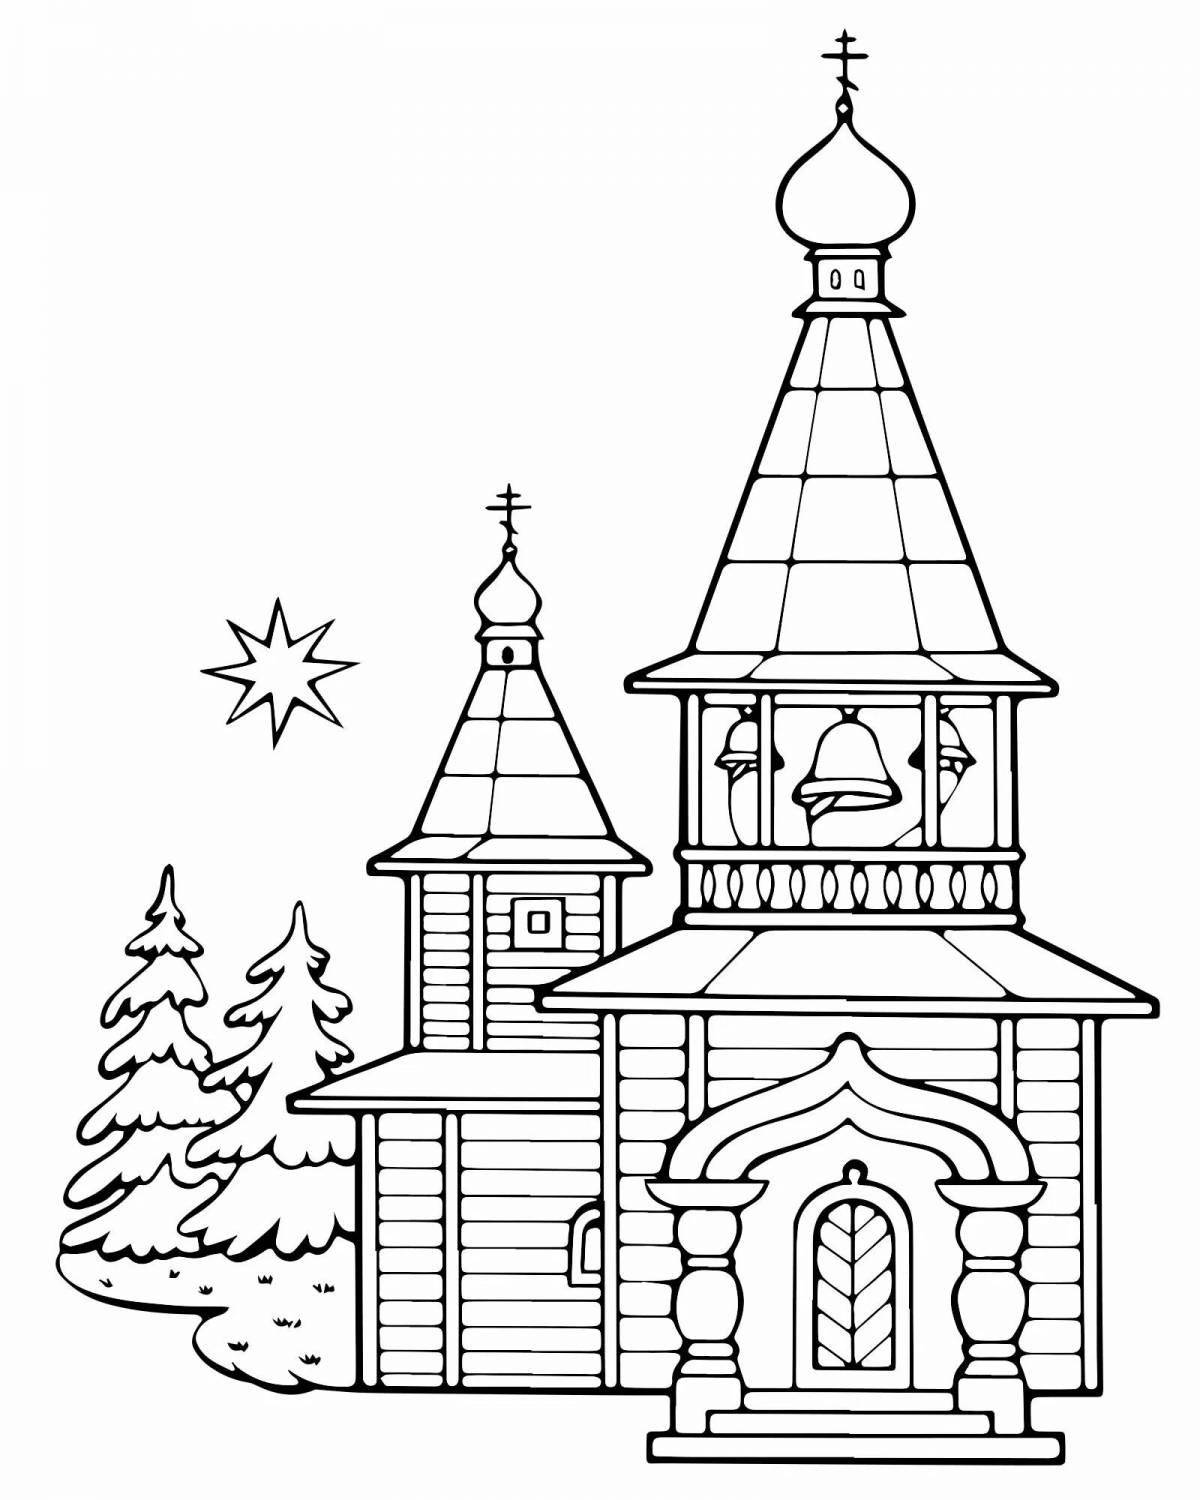 Glorious orthodox church coloring page for kids